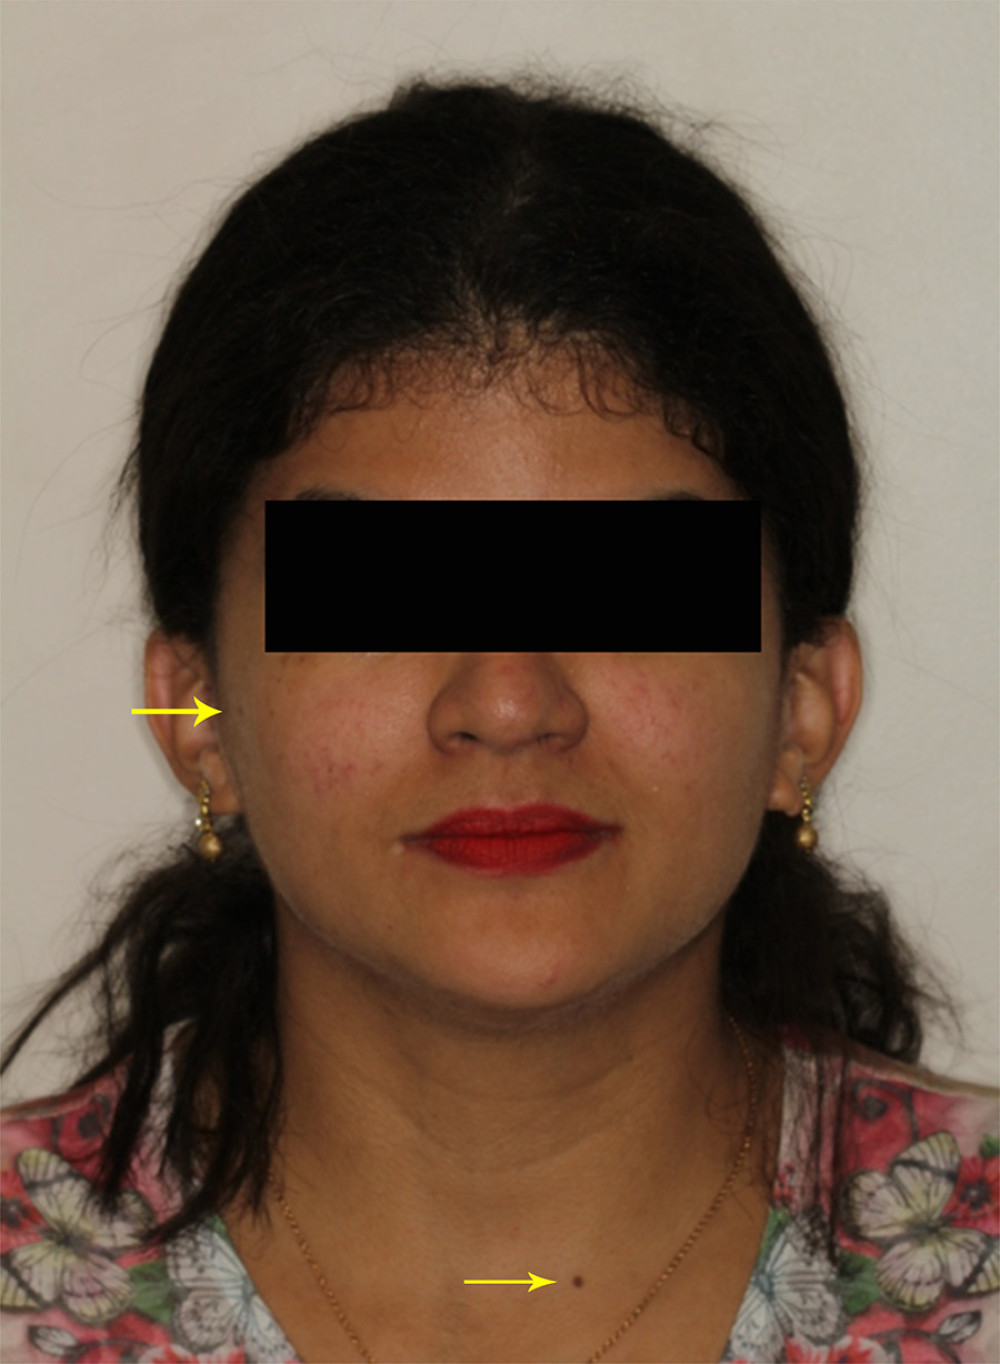 Head and neck skin maculae that were posteriorly removed by the dermatologist as a preventive intervention, avoiding the occurrence of basal cell carcinomas.